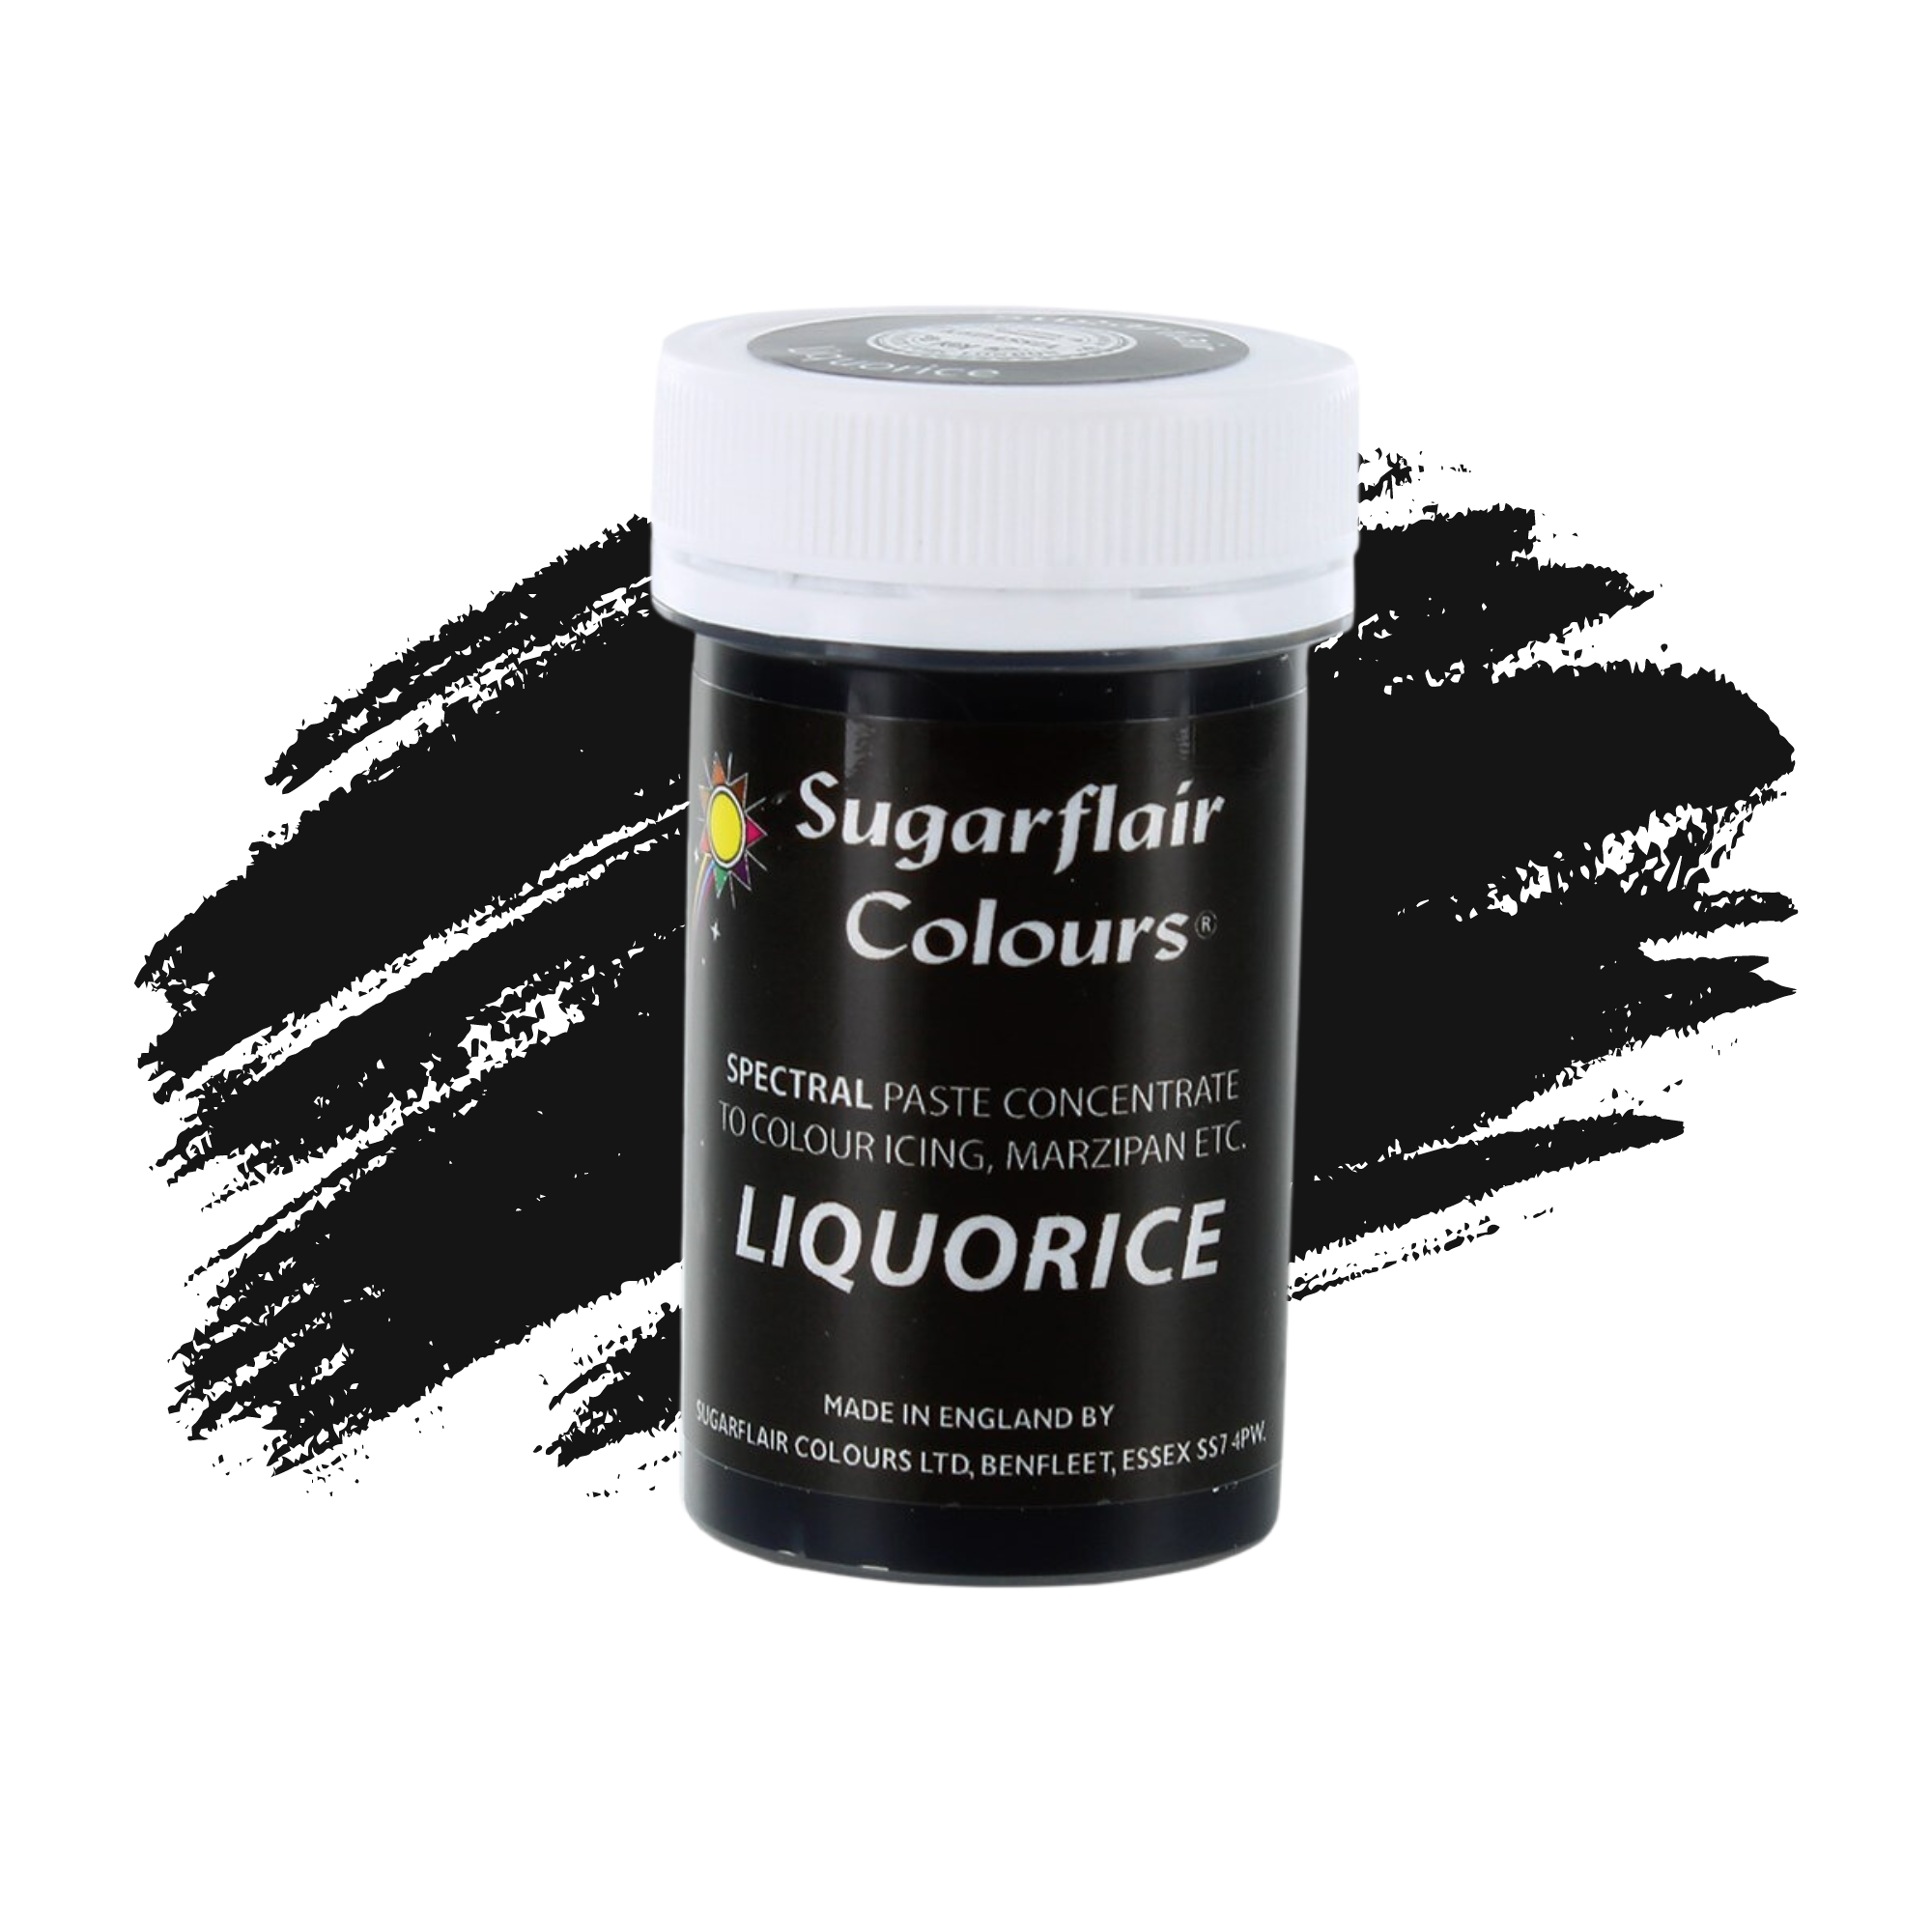 Sugarflair Paste Colours Concentrated Food Colouring - Spectral Liquorice Black - 25g